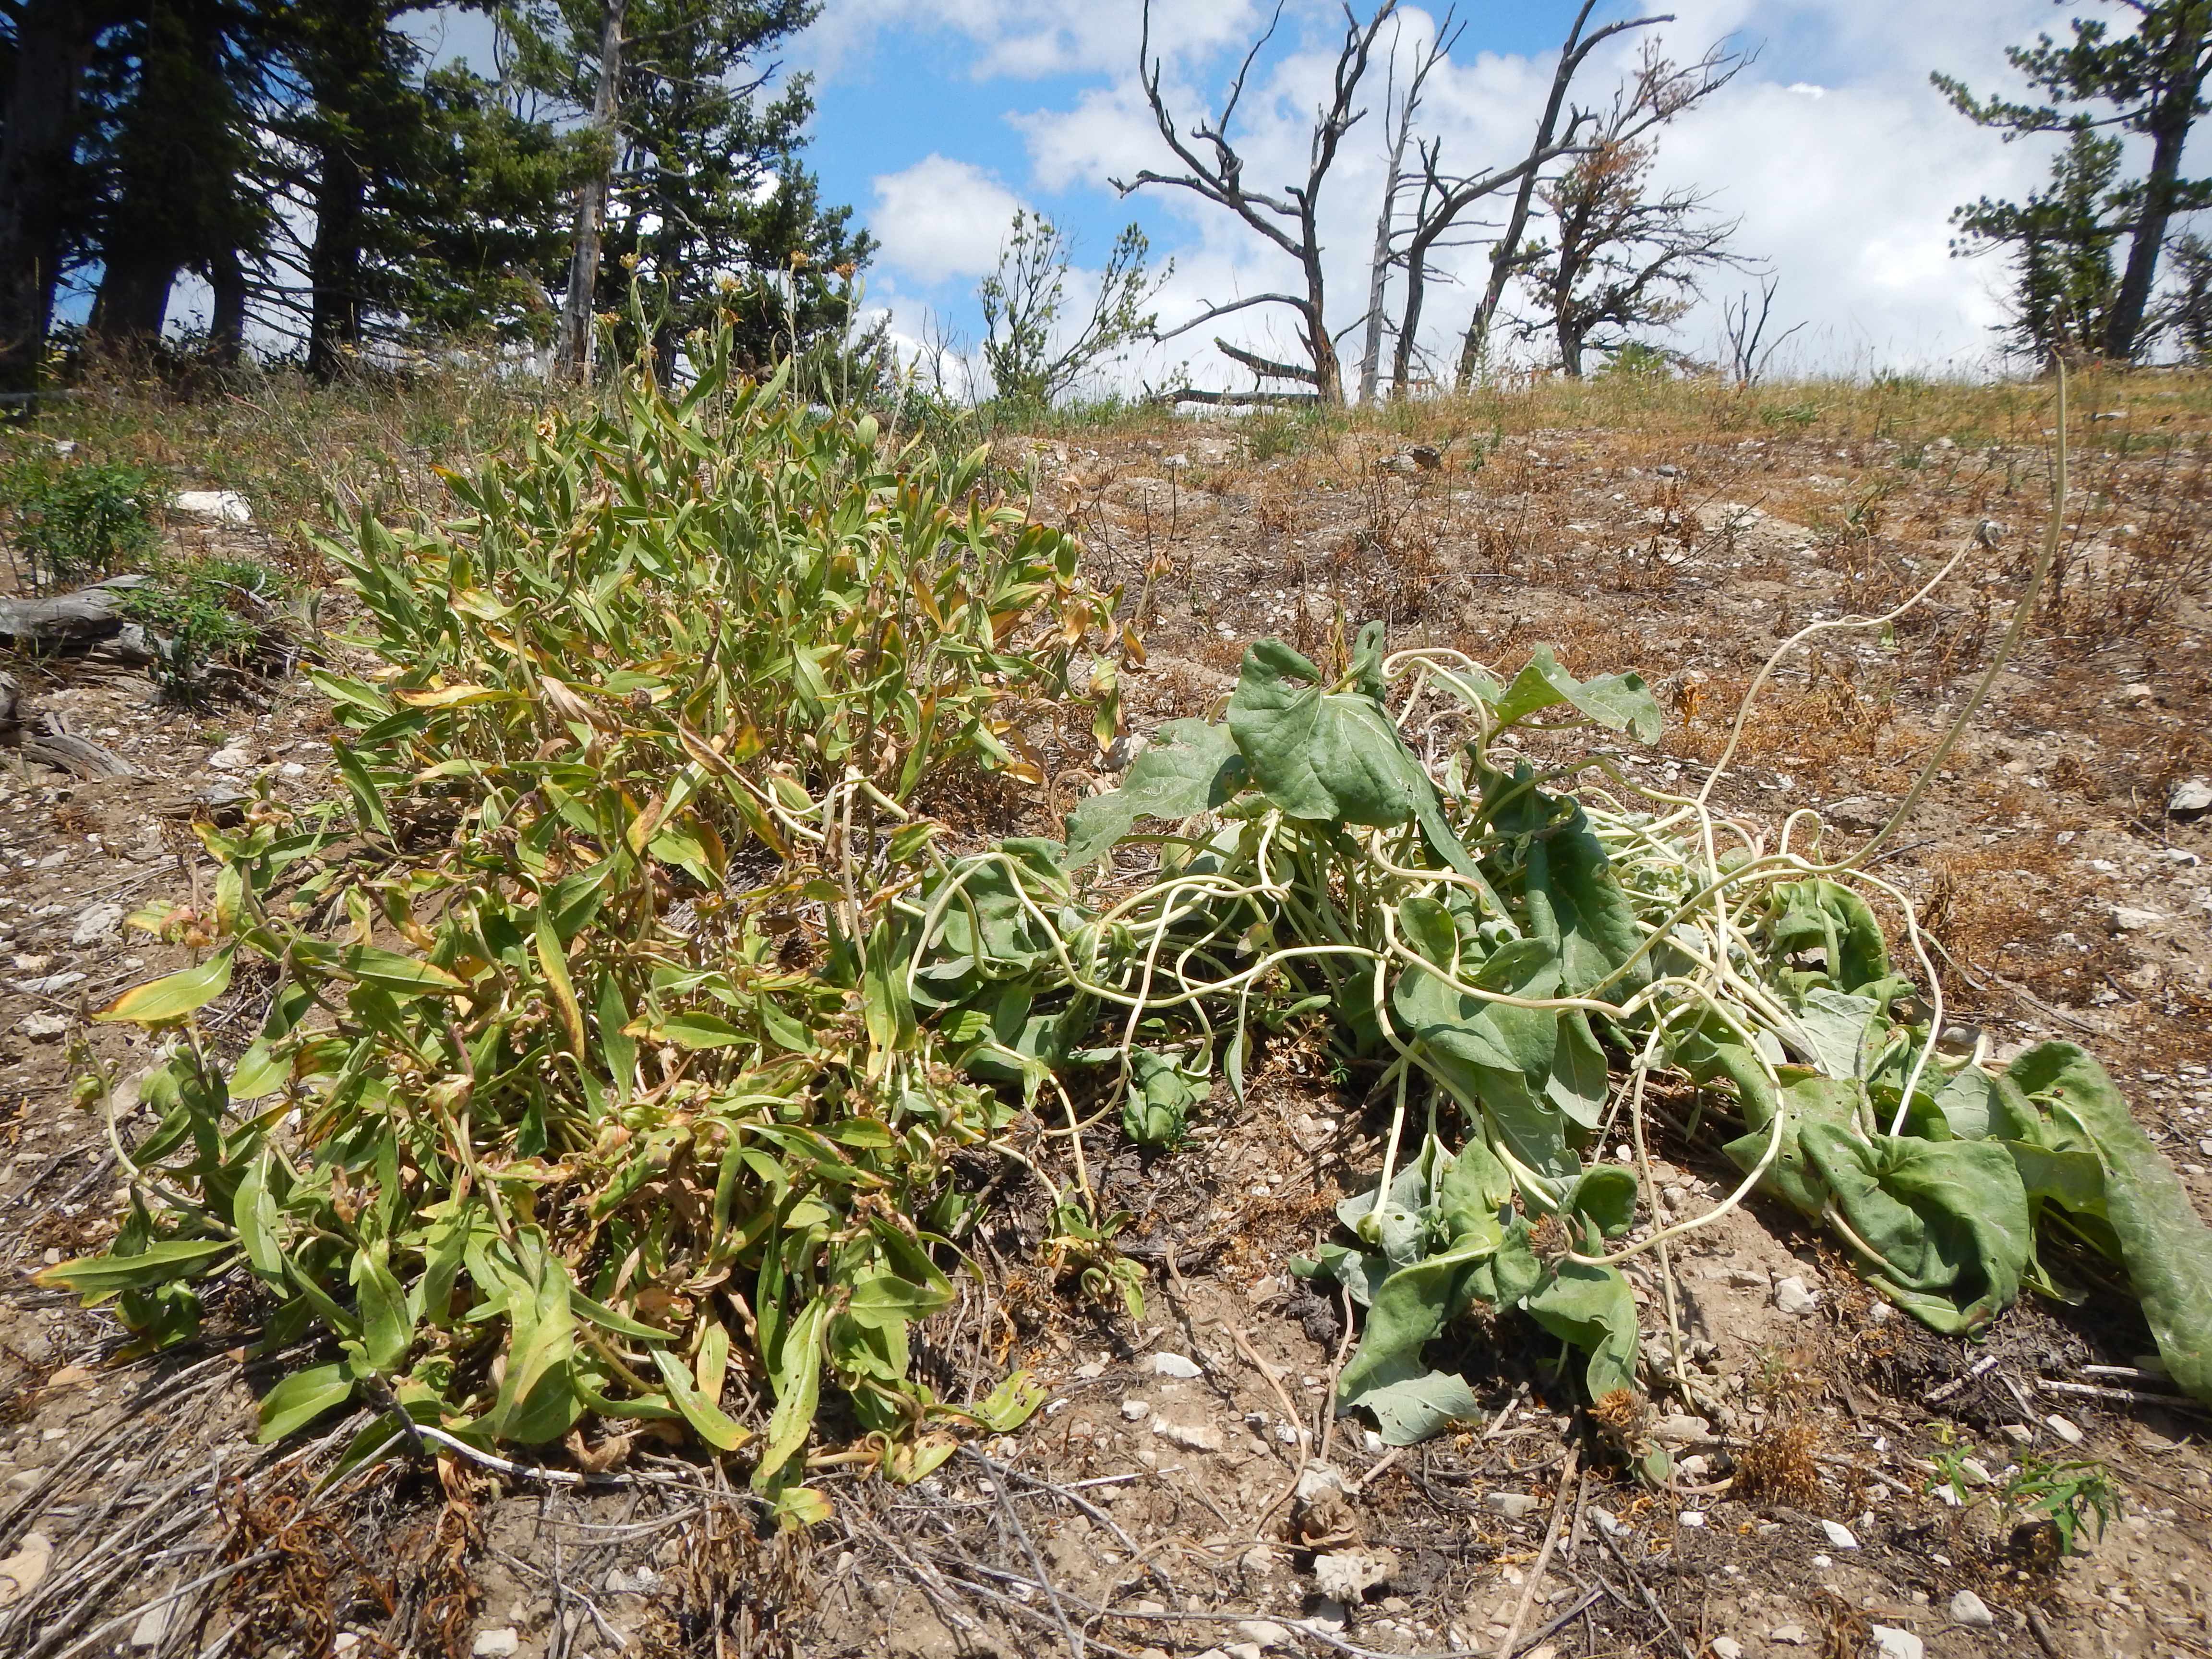 Two plants appear yellow and wilted after poisoning from herbicides